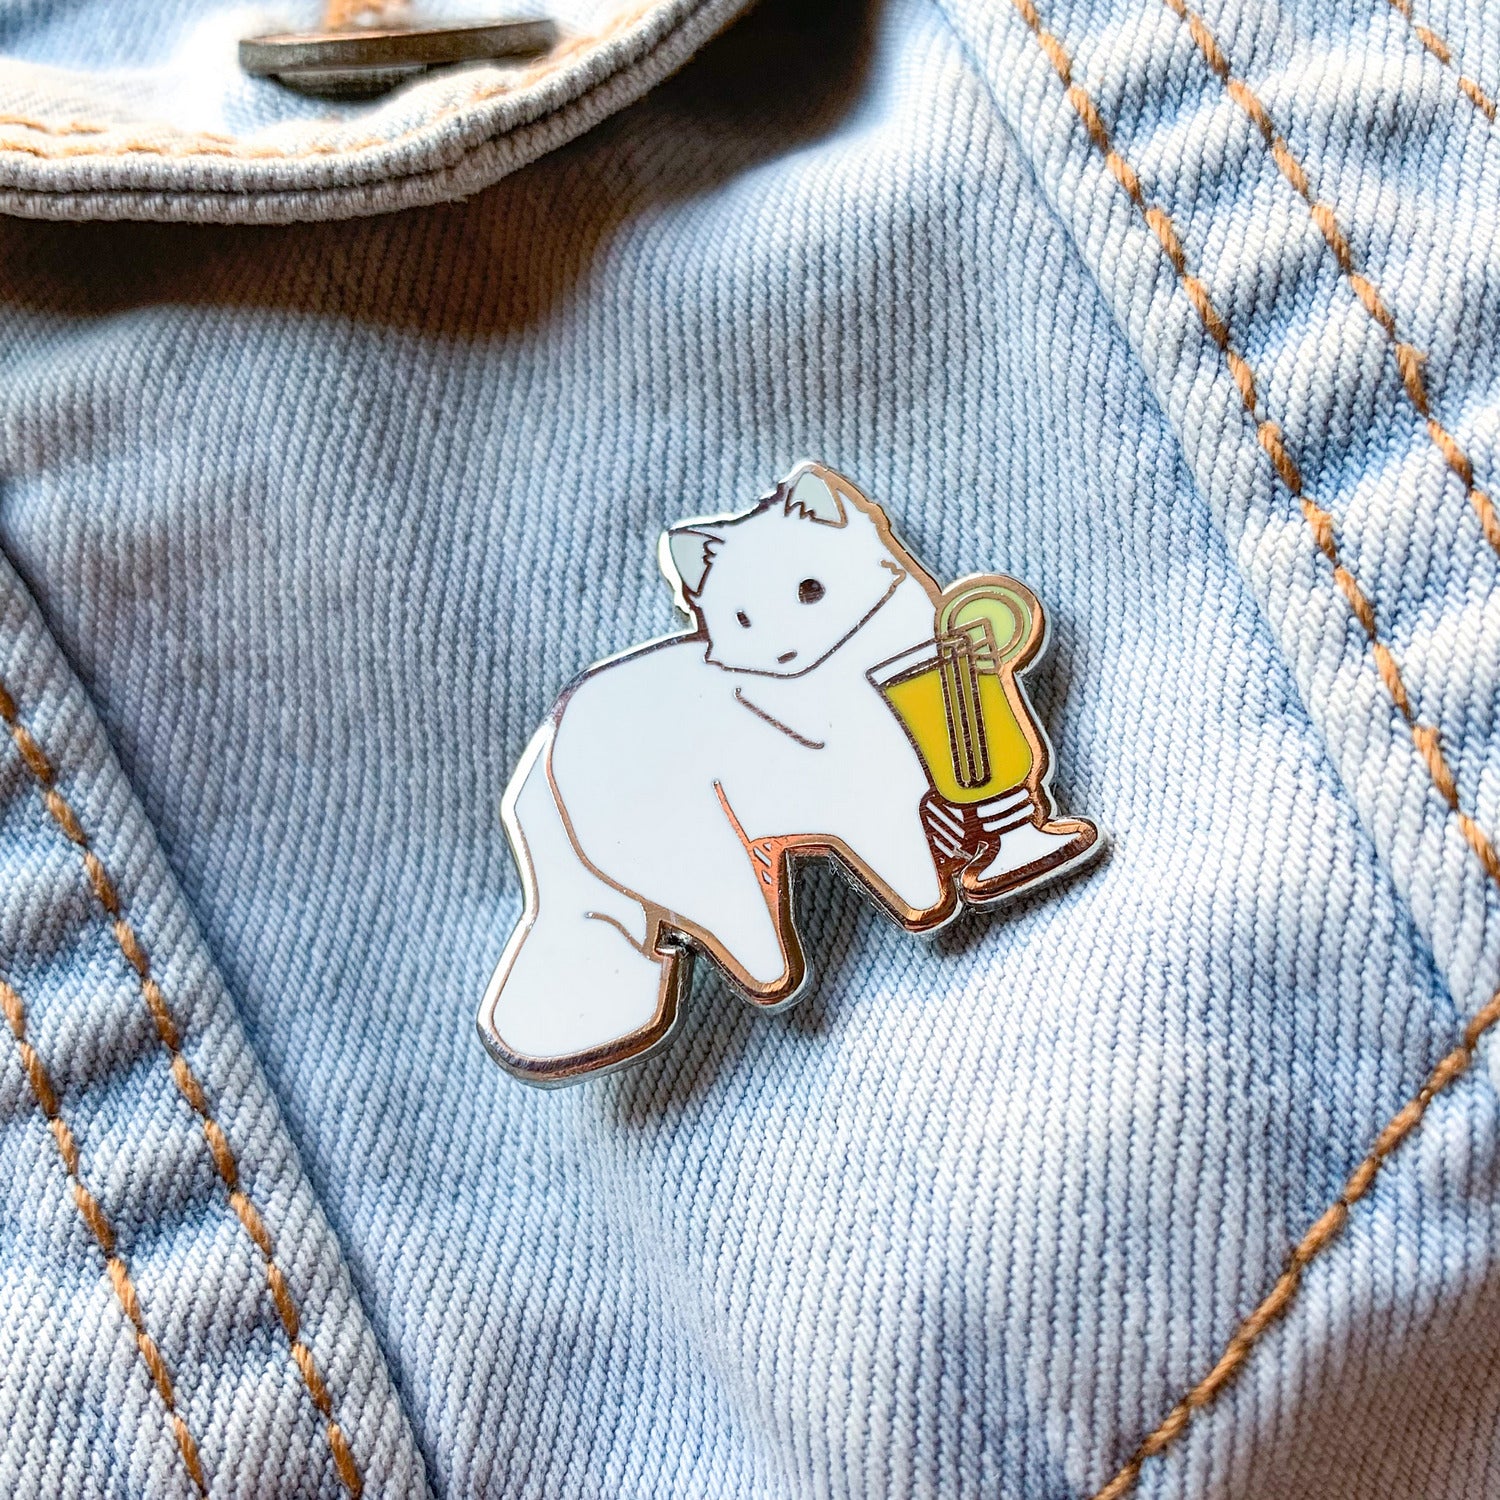 Arctic Fox & Hot Toddy Cocktail Hard Enamel Pin by Cocktail Critters